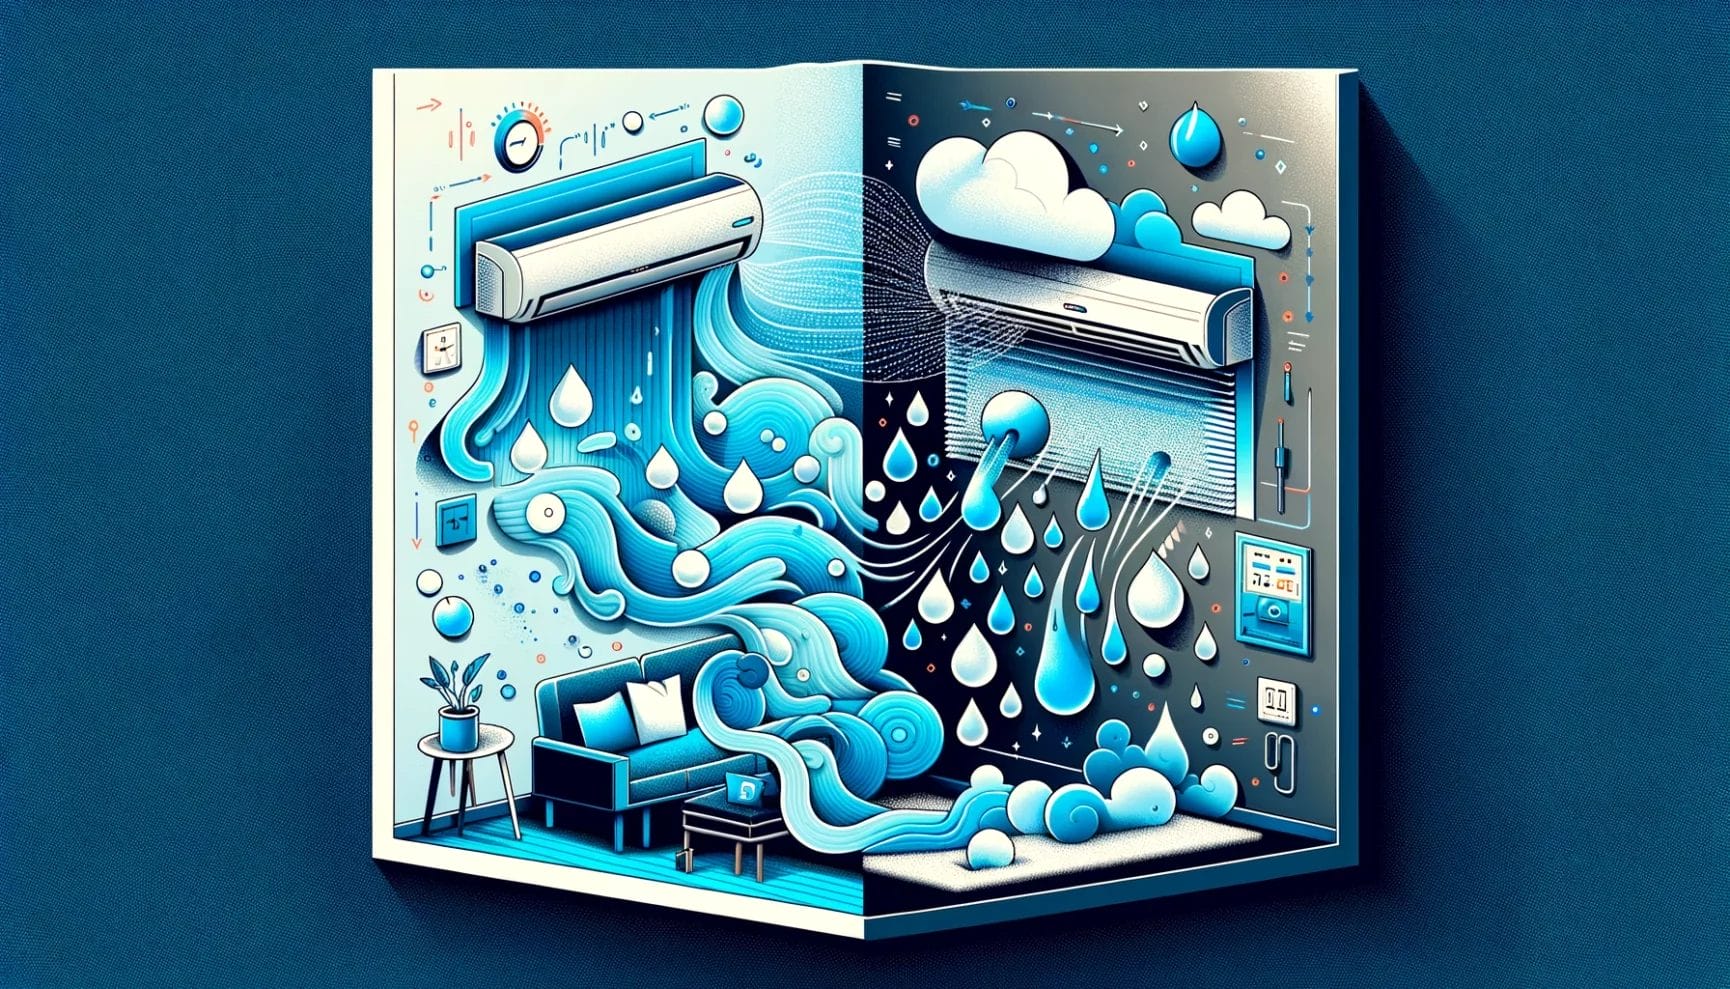 An illustrative 3d artwork depicting an air conditioning unit cooling a stylized indoor space with exaggerated streams of cold air and water droplets.